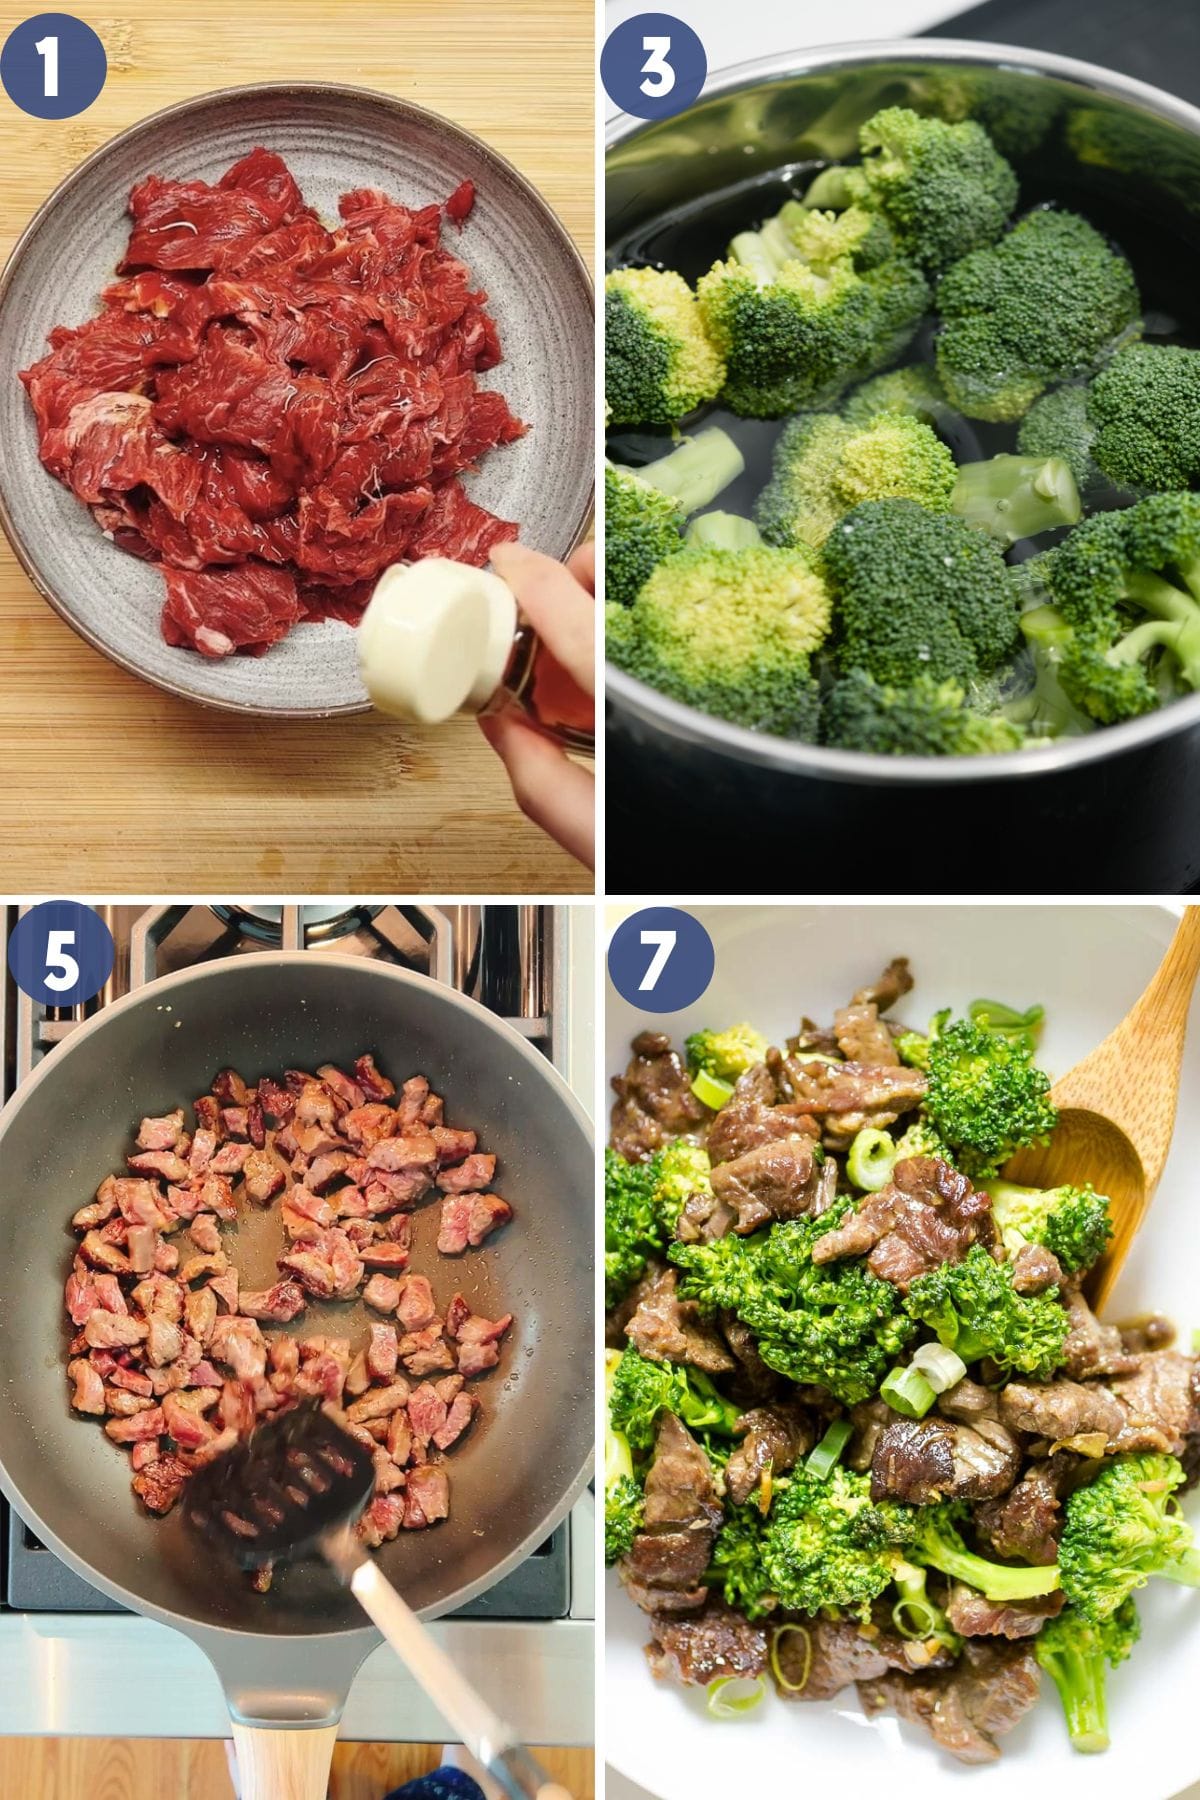 Person demos how to make Paleo and Whole30 beef broccoli stir fry healthy. 